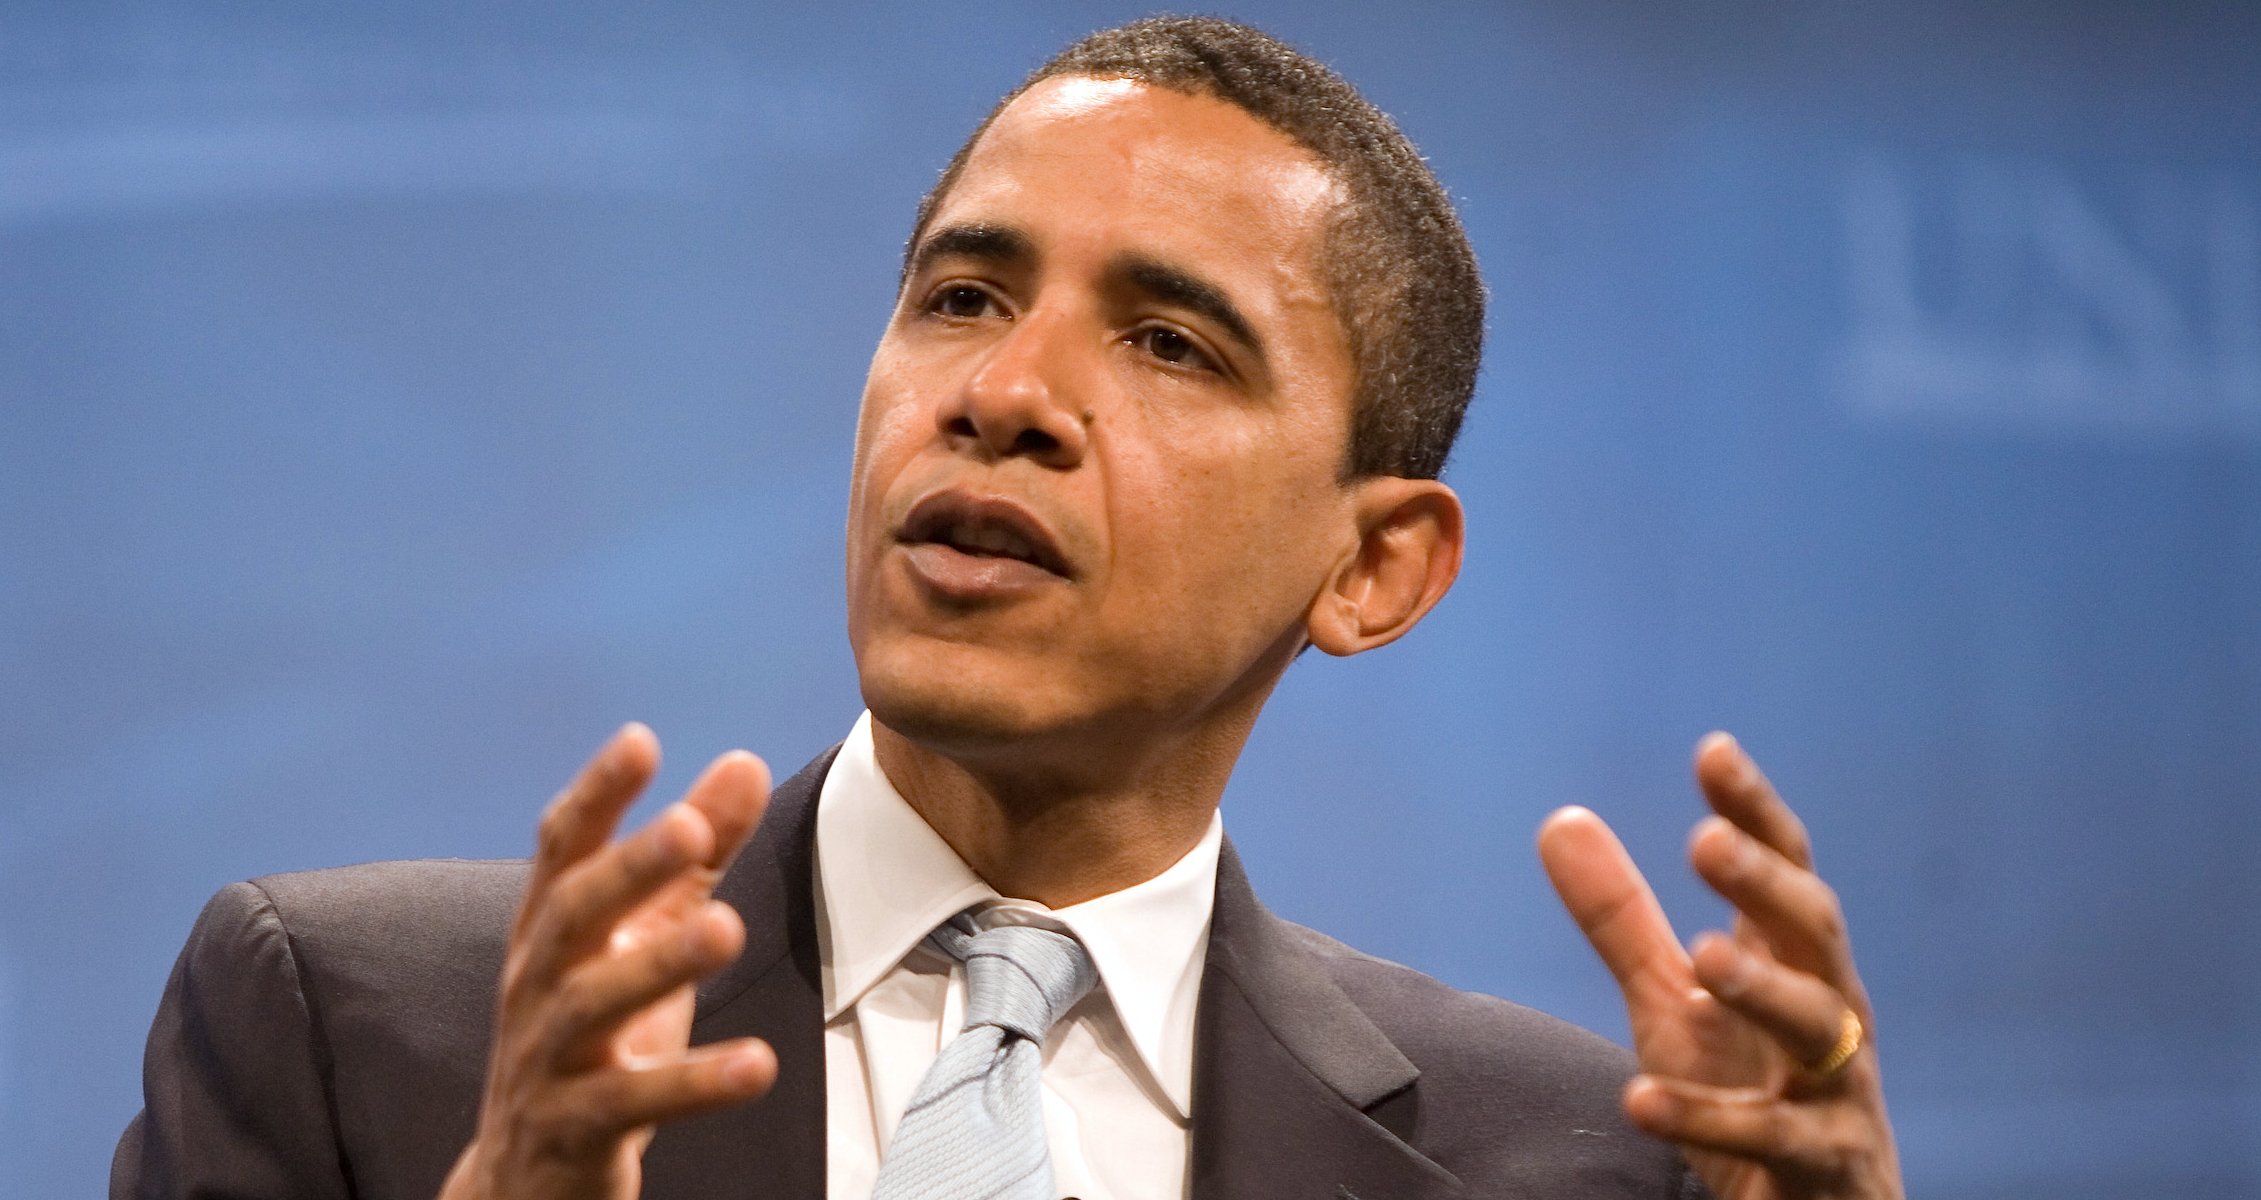 Obama Busts 4 Conservative Myths About the Economy – ‘Here’s The Truth’